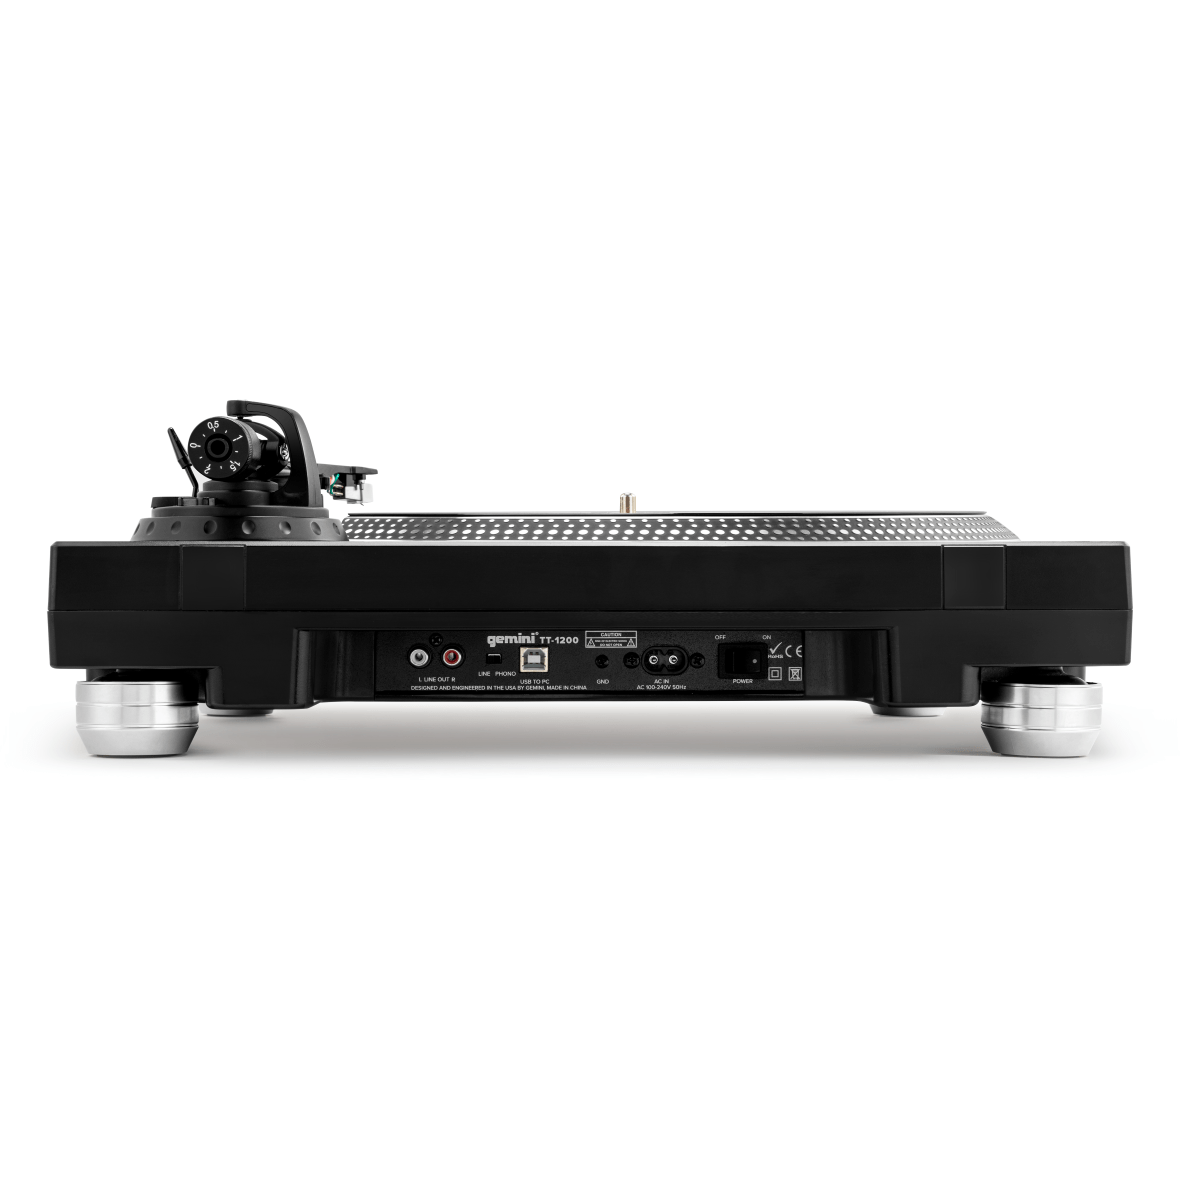 TT-1200: Belt Drive Turntable With USB Interface